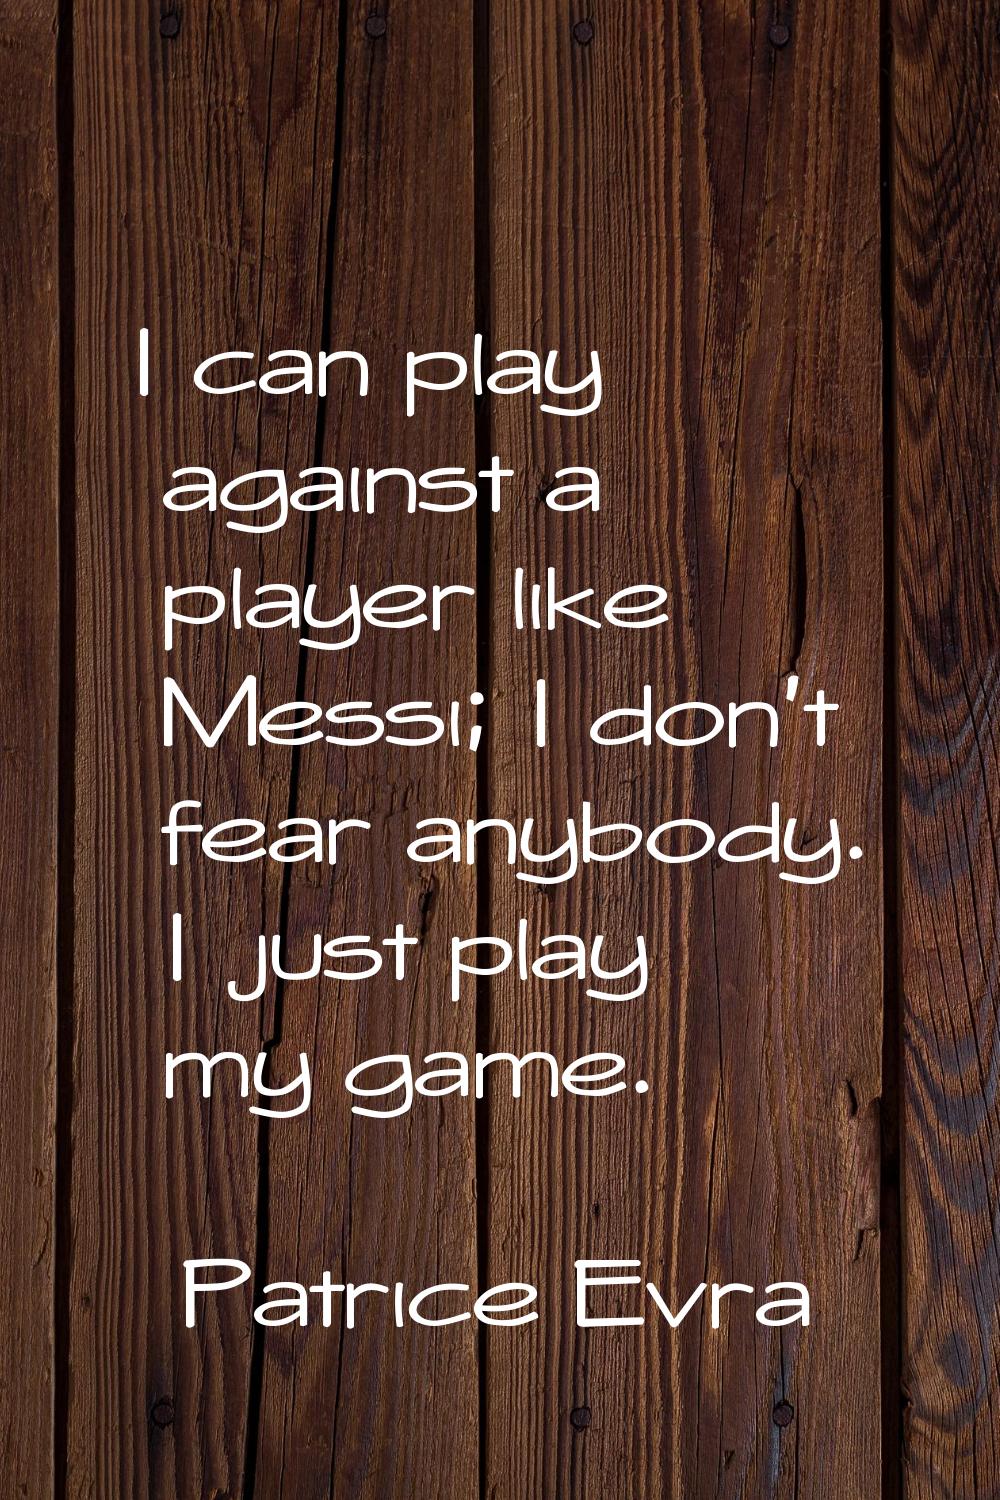 I can play against a player like Messi; I don't fear anybody. I just play my game.